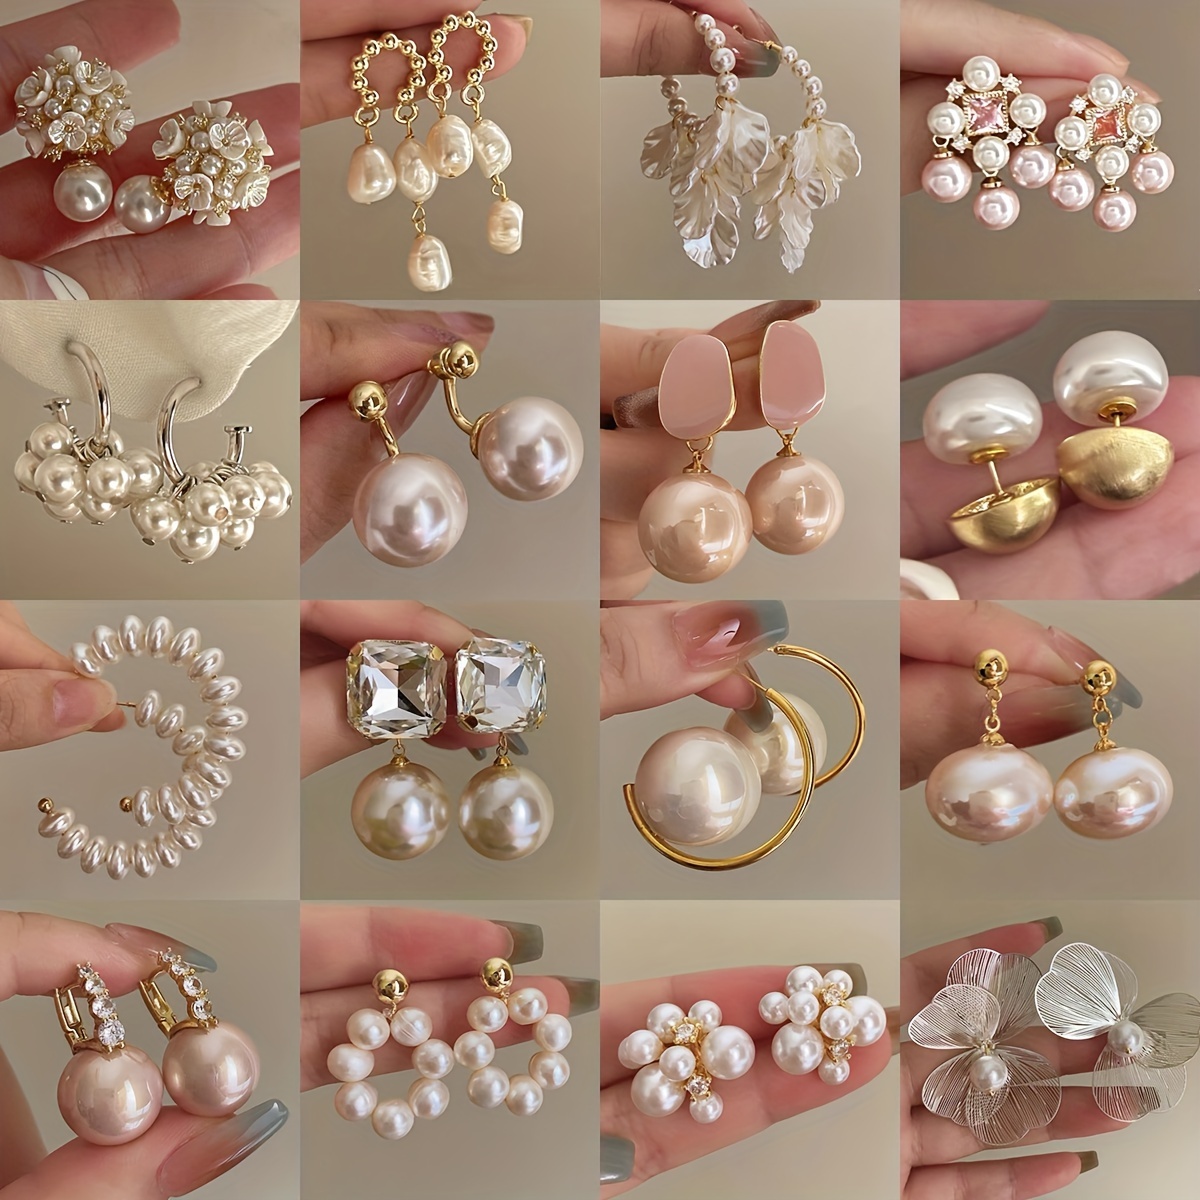 10 pairs of earrings buttterly hoop flower heart and multiple styles for u to match various outfits party accessories